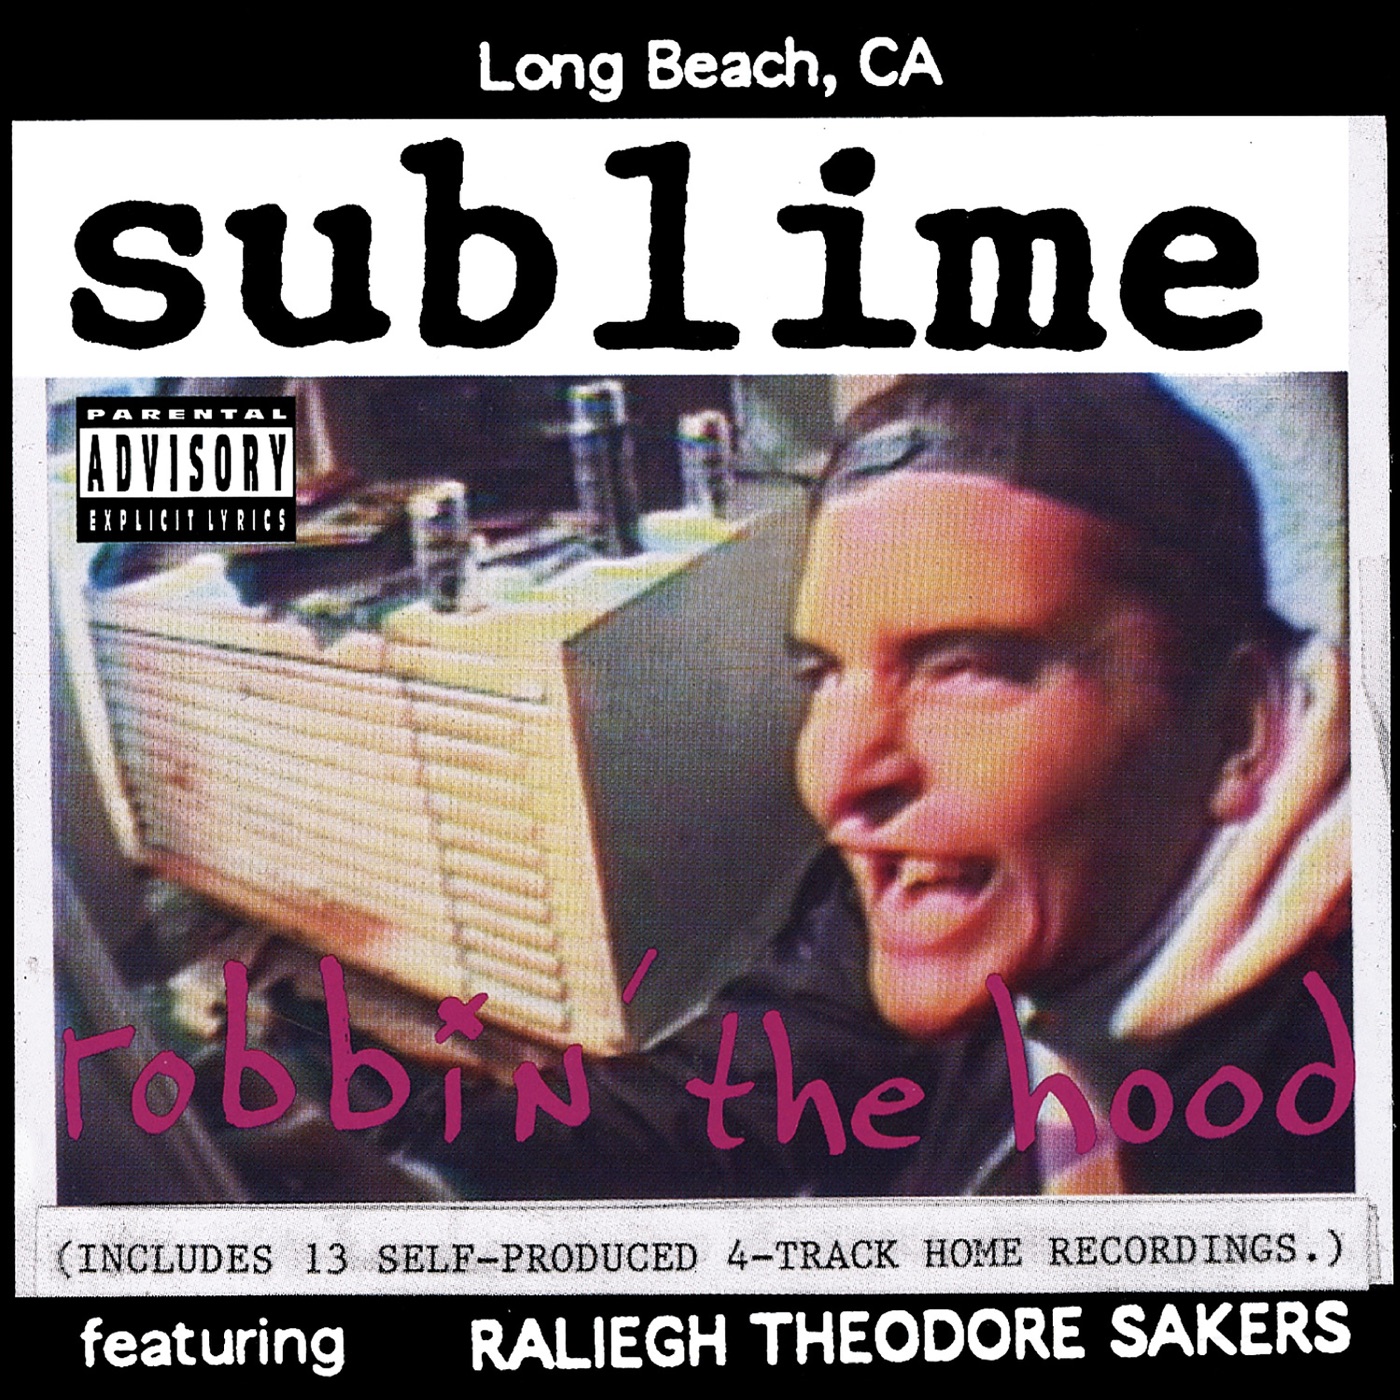 Robbin' The Hood by Sublime